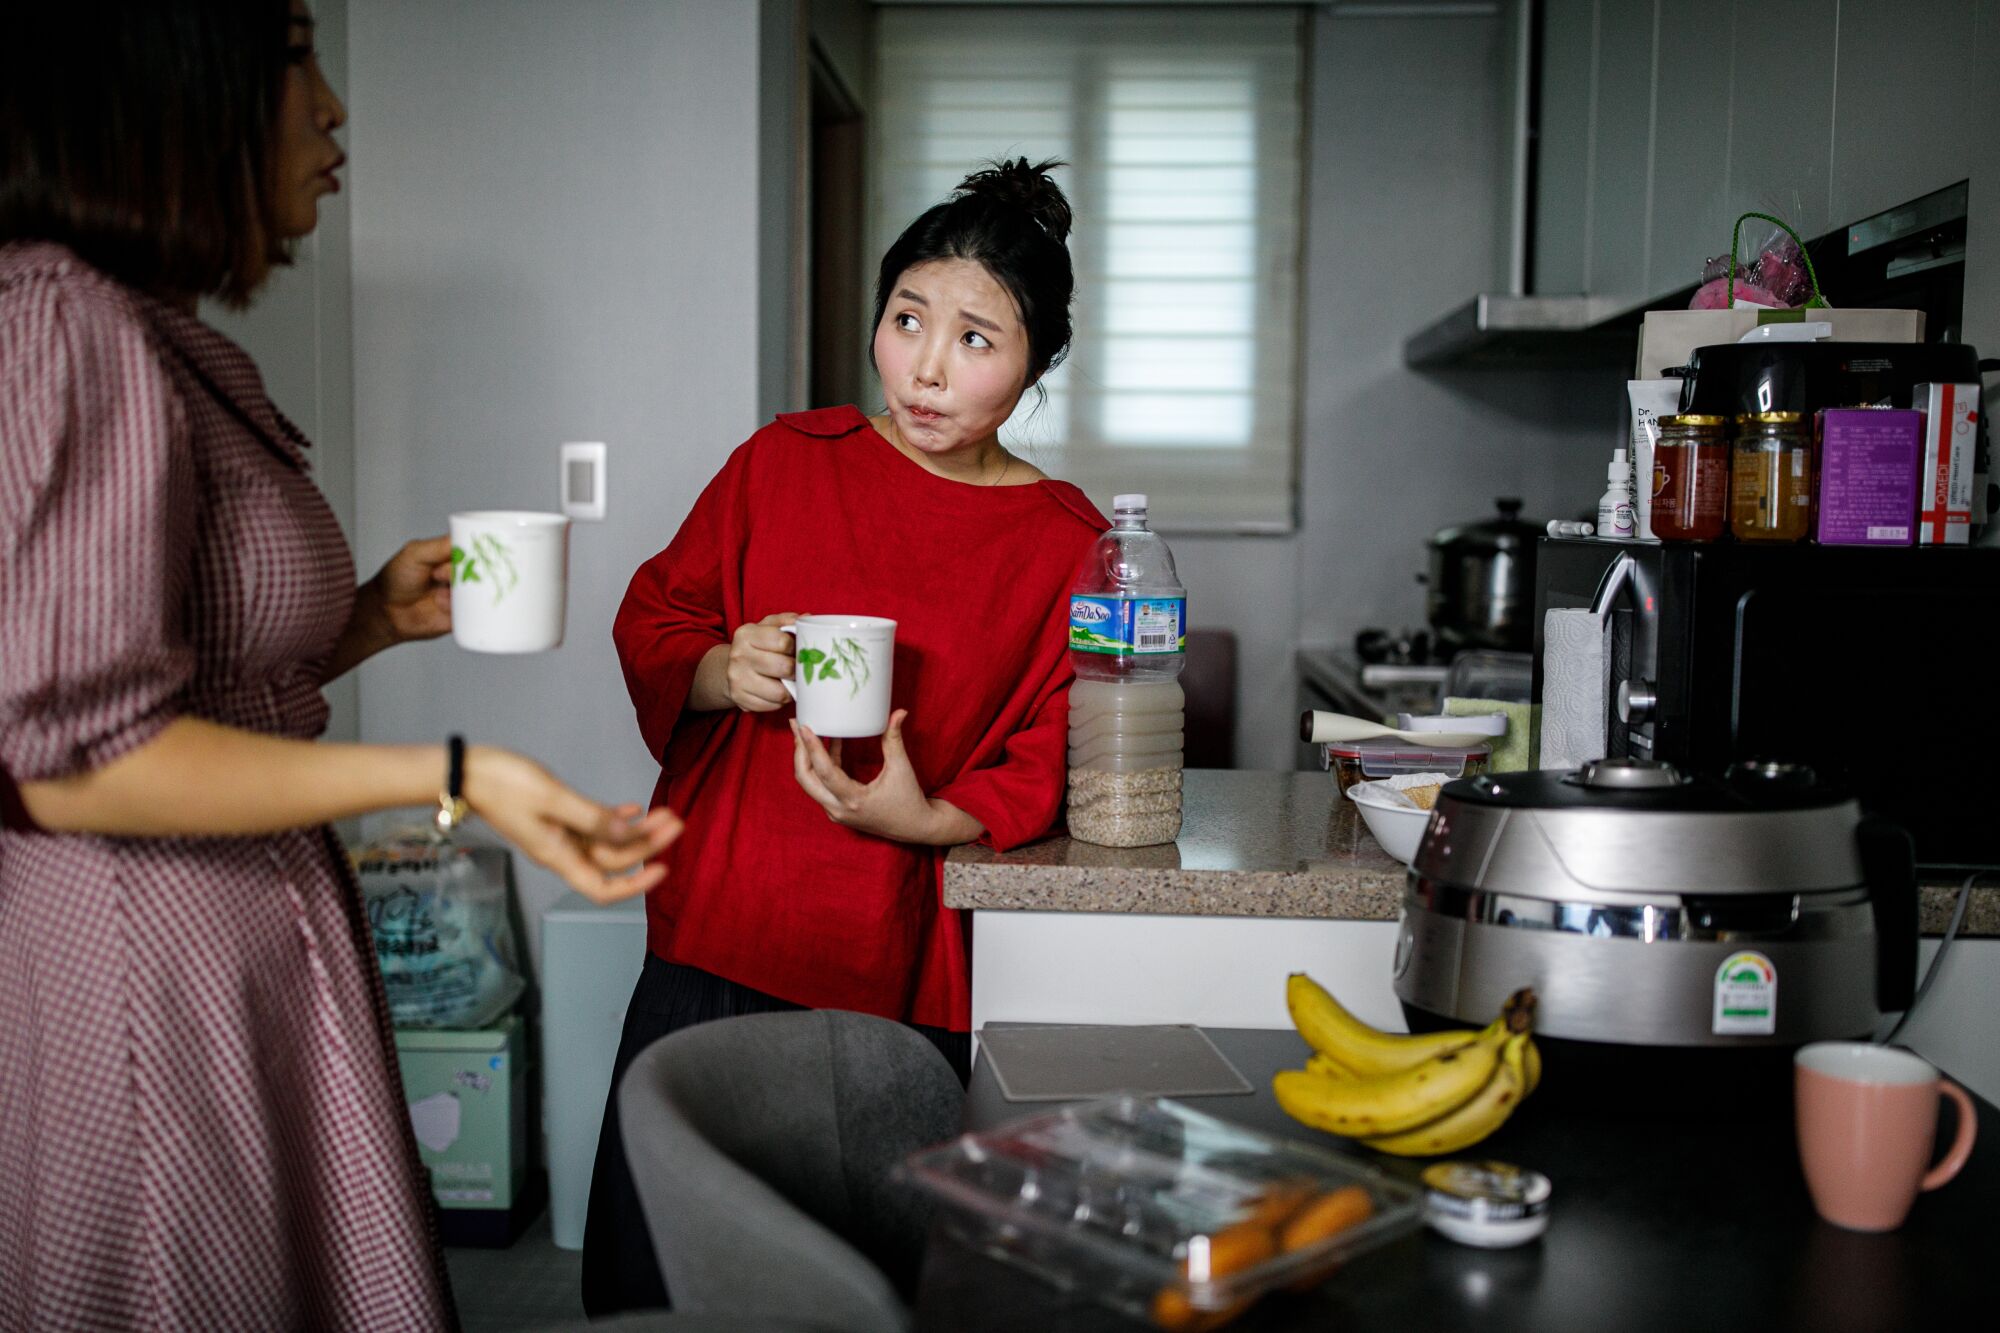 Yoon Seol Mi, right, spends time with Seok Hyeon Ju, a fellow North Korean refugee, at her home in Siheung, South Korea.